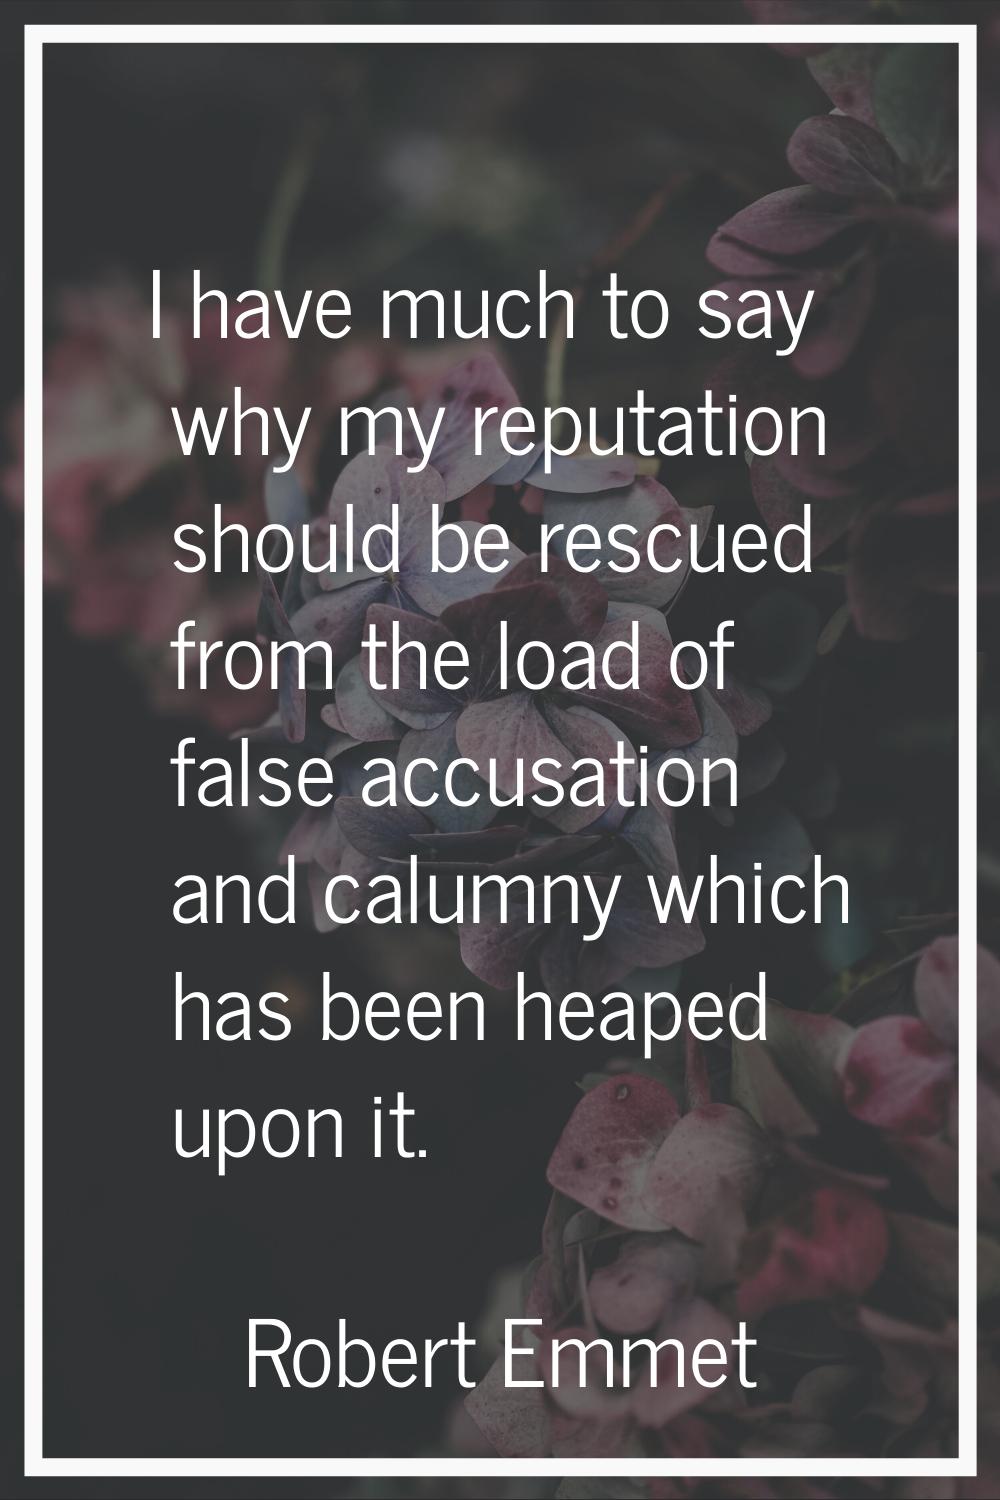 I have much to say why my reputation should be rescued from the load of false accusation and calumn